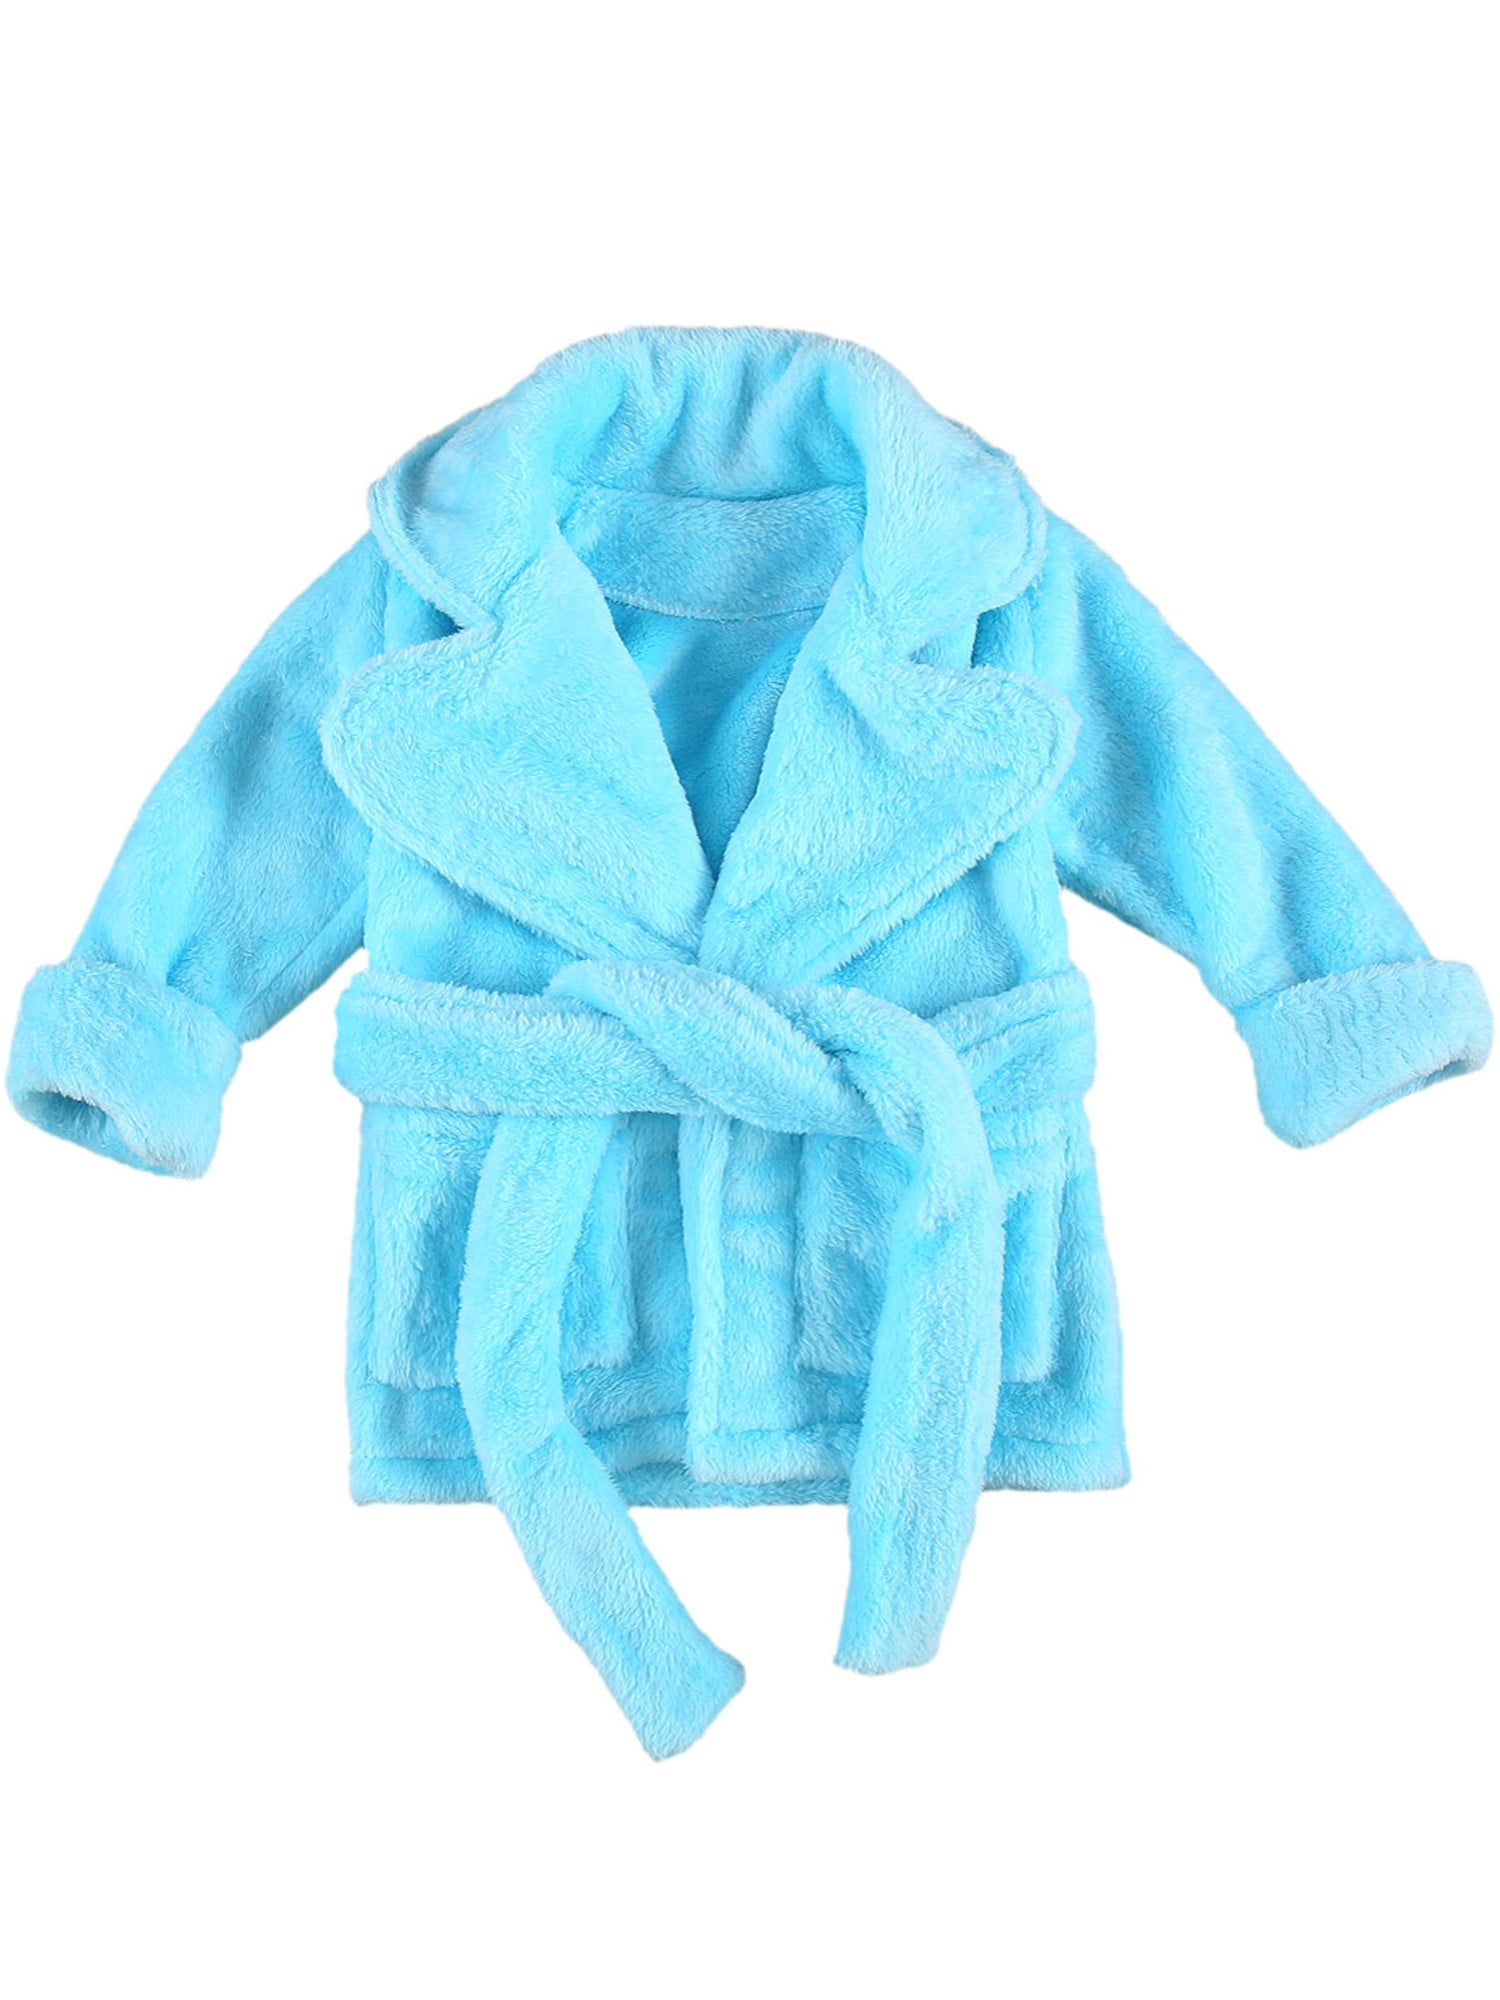 Get Wivvit Girls Boys Novelty Puppy Dog Hooded Dressing Gown with Ears Sizes from 2 to 11 Years 